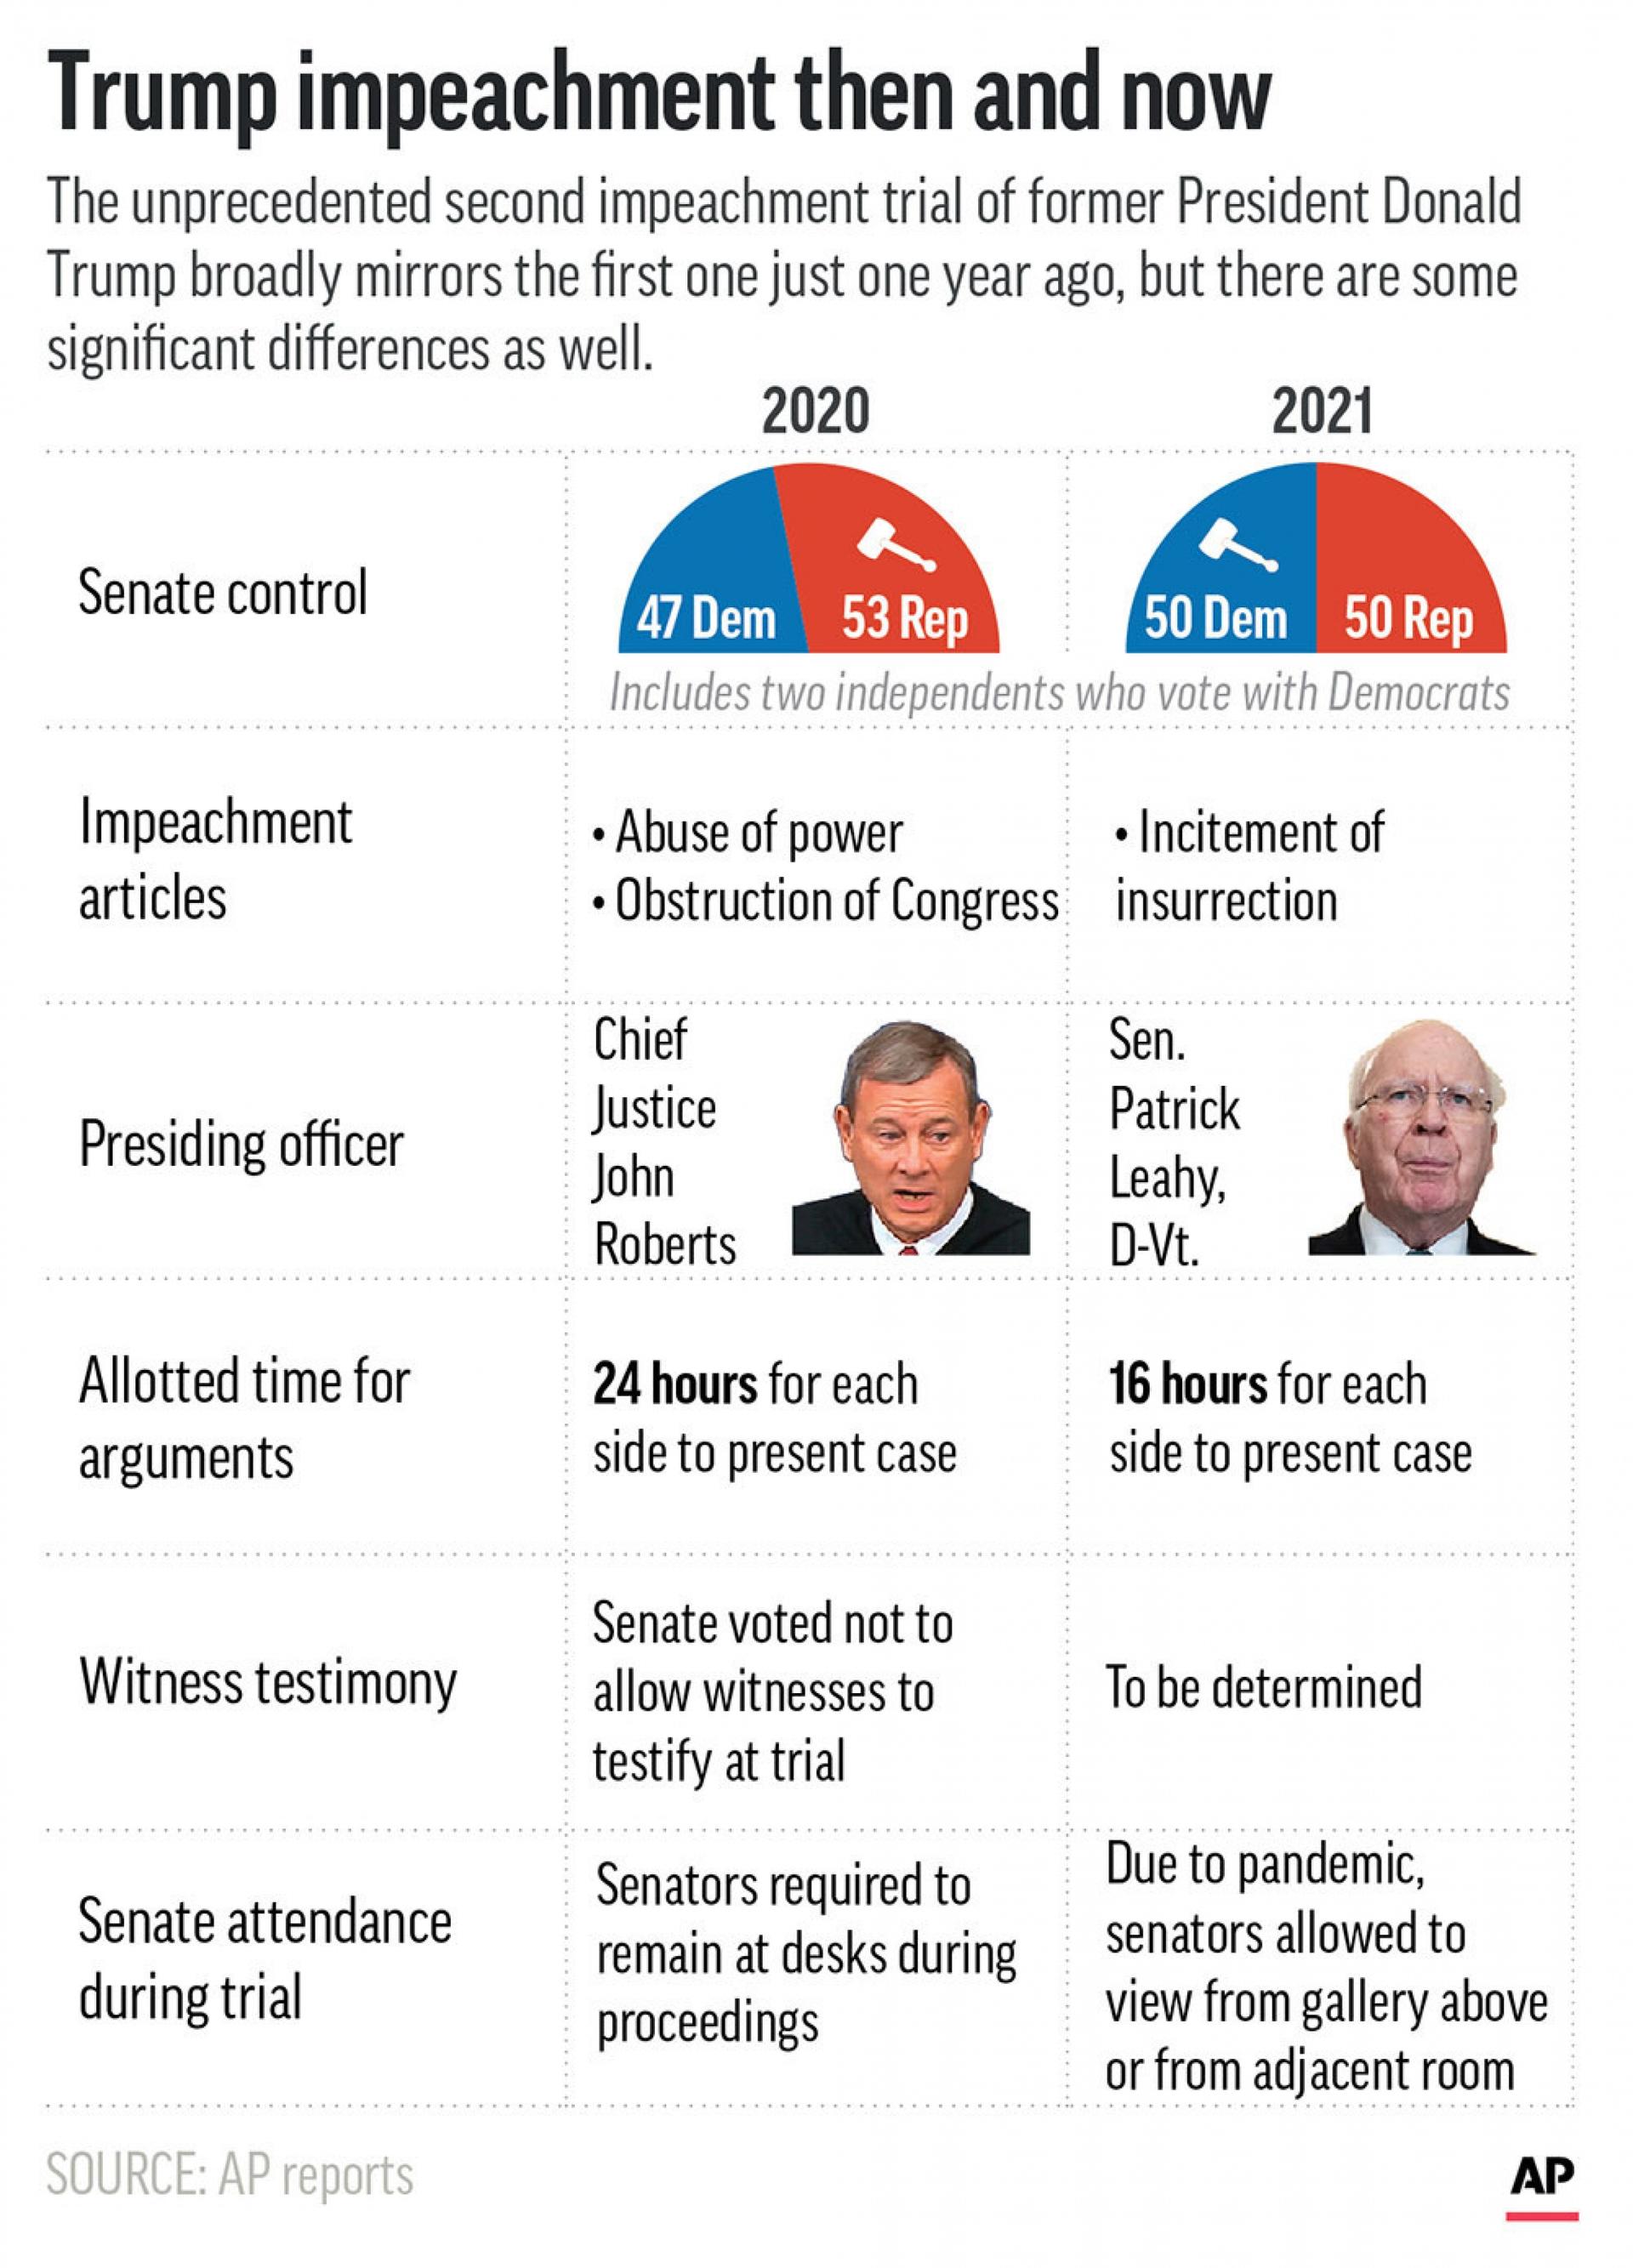 A graphic showing statistics about the Senate composition for Donald Trump's first impeachment in 2020 and in 2021.